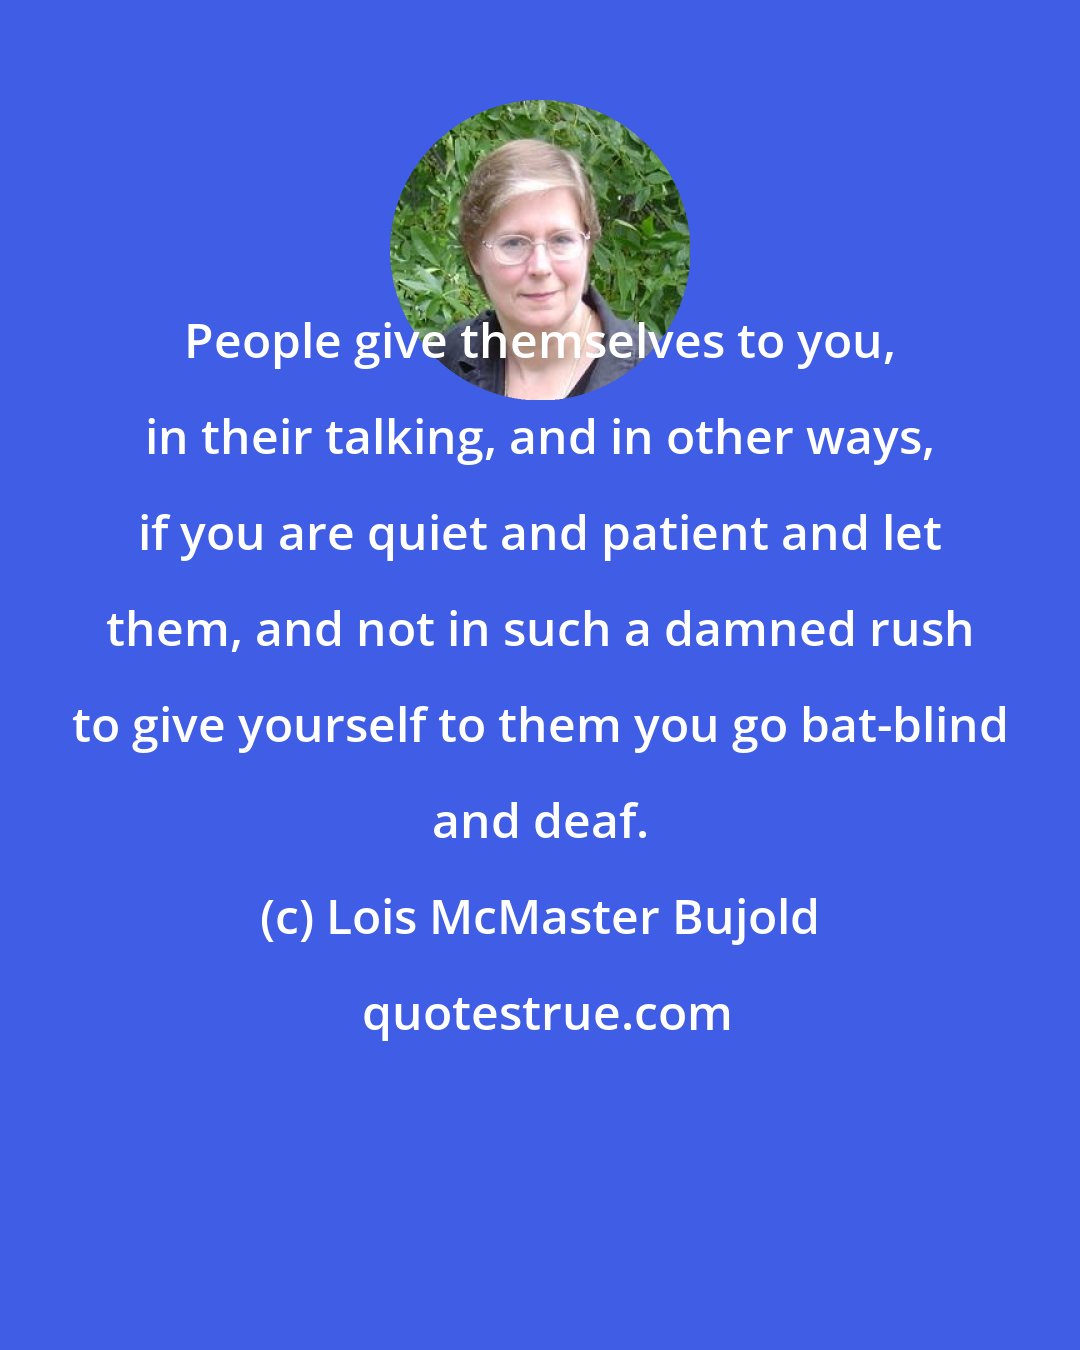 Lois McMaster Bujold: People give themselves to you, in their talking, and in other ways, if you are quiet and patient and let them, and not in such a damned rush to give yourself to them you go bat-blind and deaf.